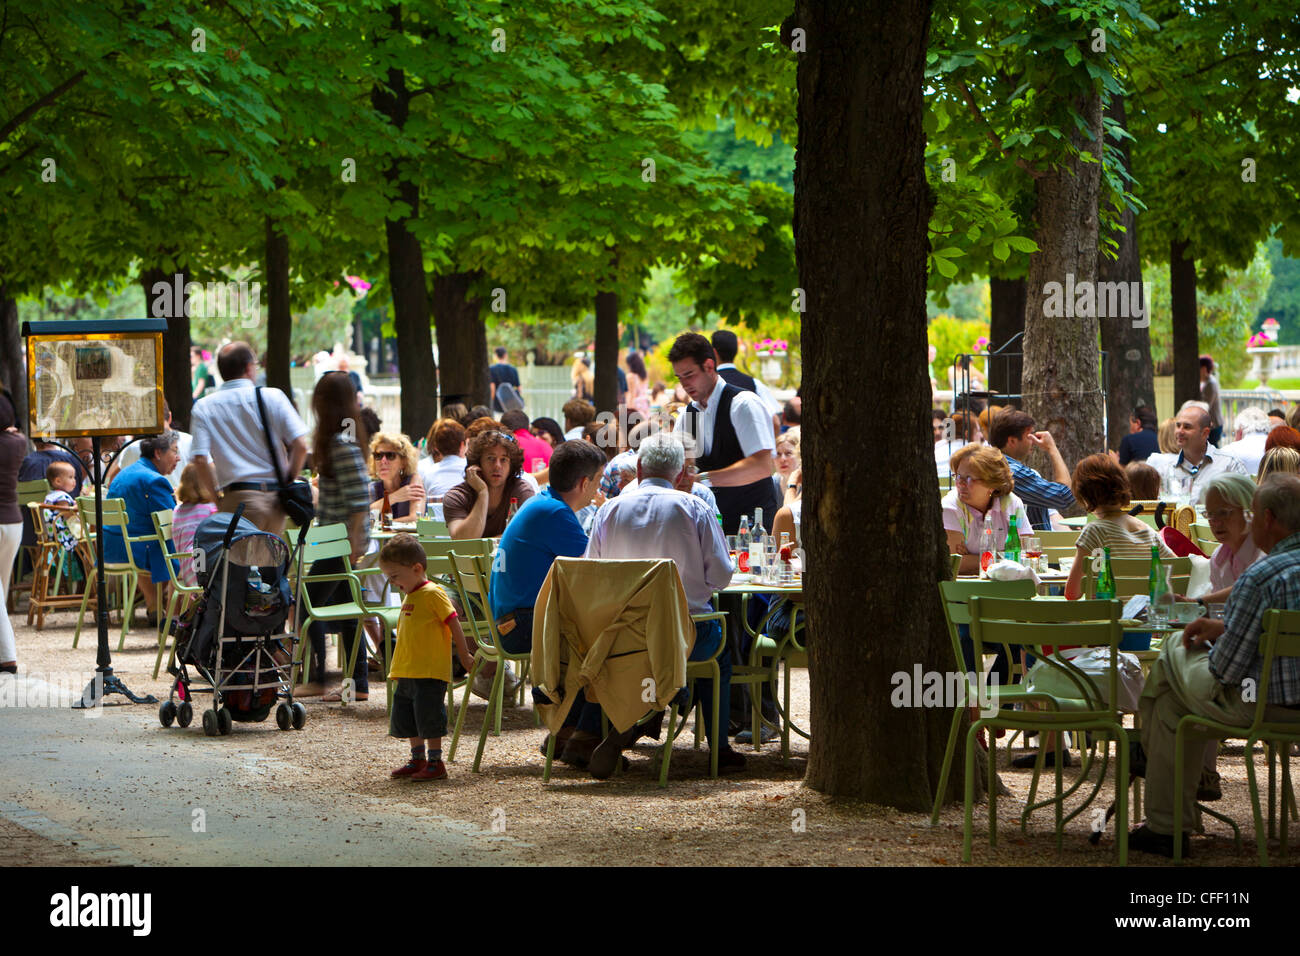 People dining outdoors, Jardin du Luxembourg, Paris, France, Europe Stock Photo